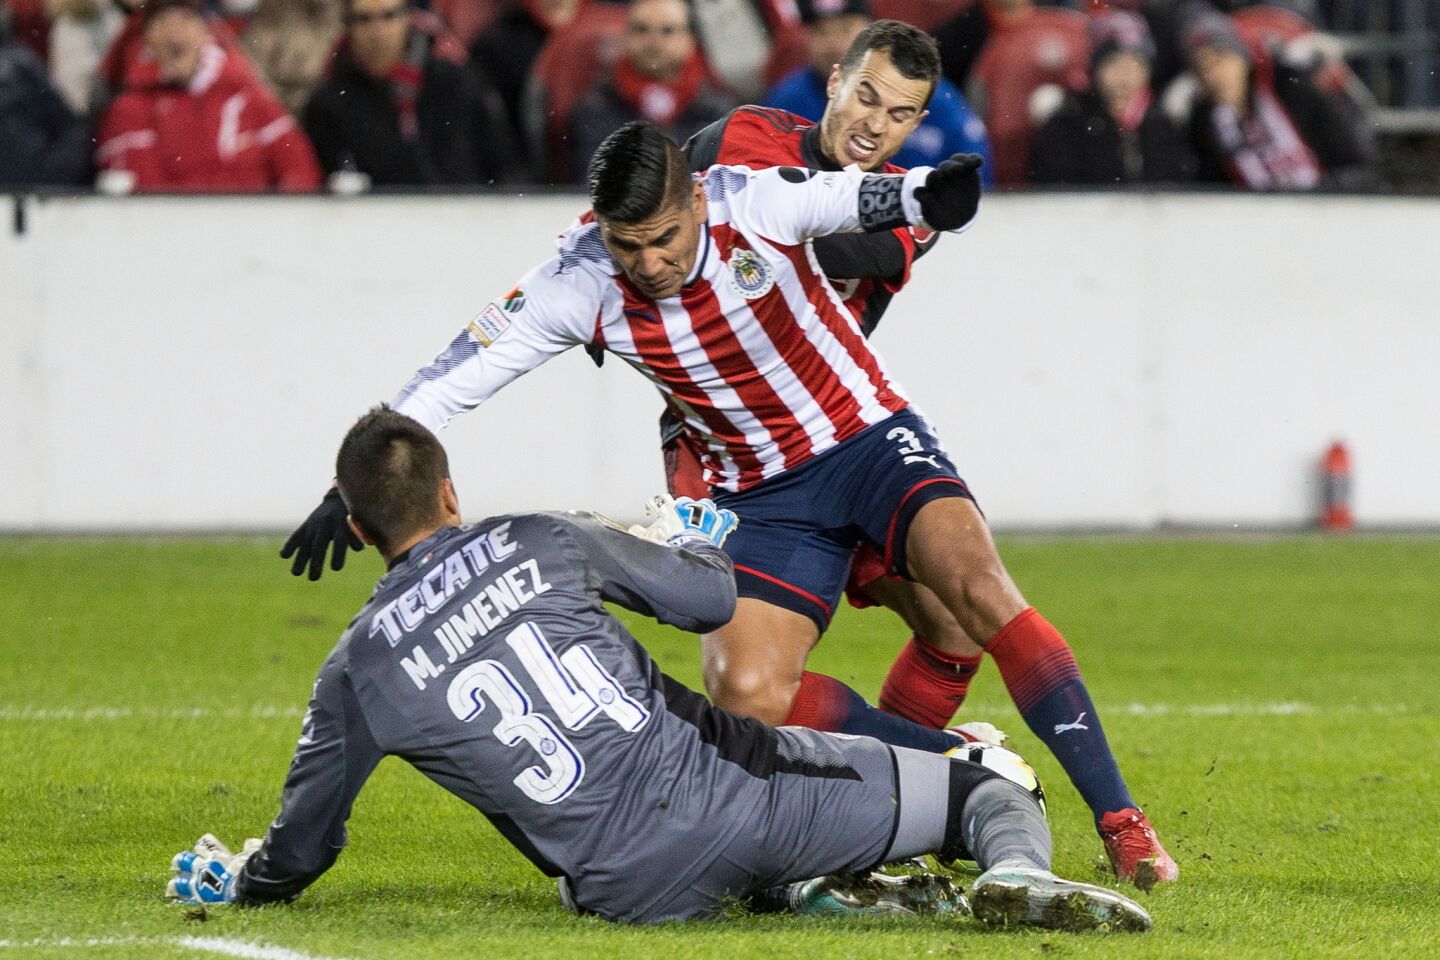 Guadalajara's Carlos Salcido (3) and goalkeeper Miguel Jimenez combine to thwart Toronto FC's Sebastian Giovinco during the first half in the first leg of the CONCACAF Champions League soccer final, Tuesday, April 17, 2018, in Toronto. (Chris Young/The Canadian Press via AP)